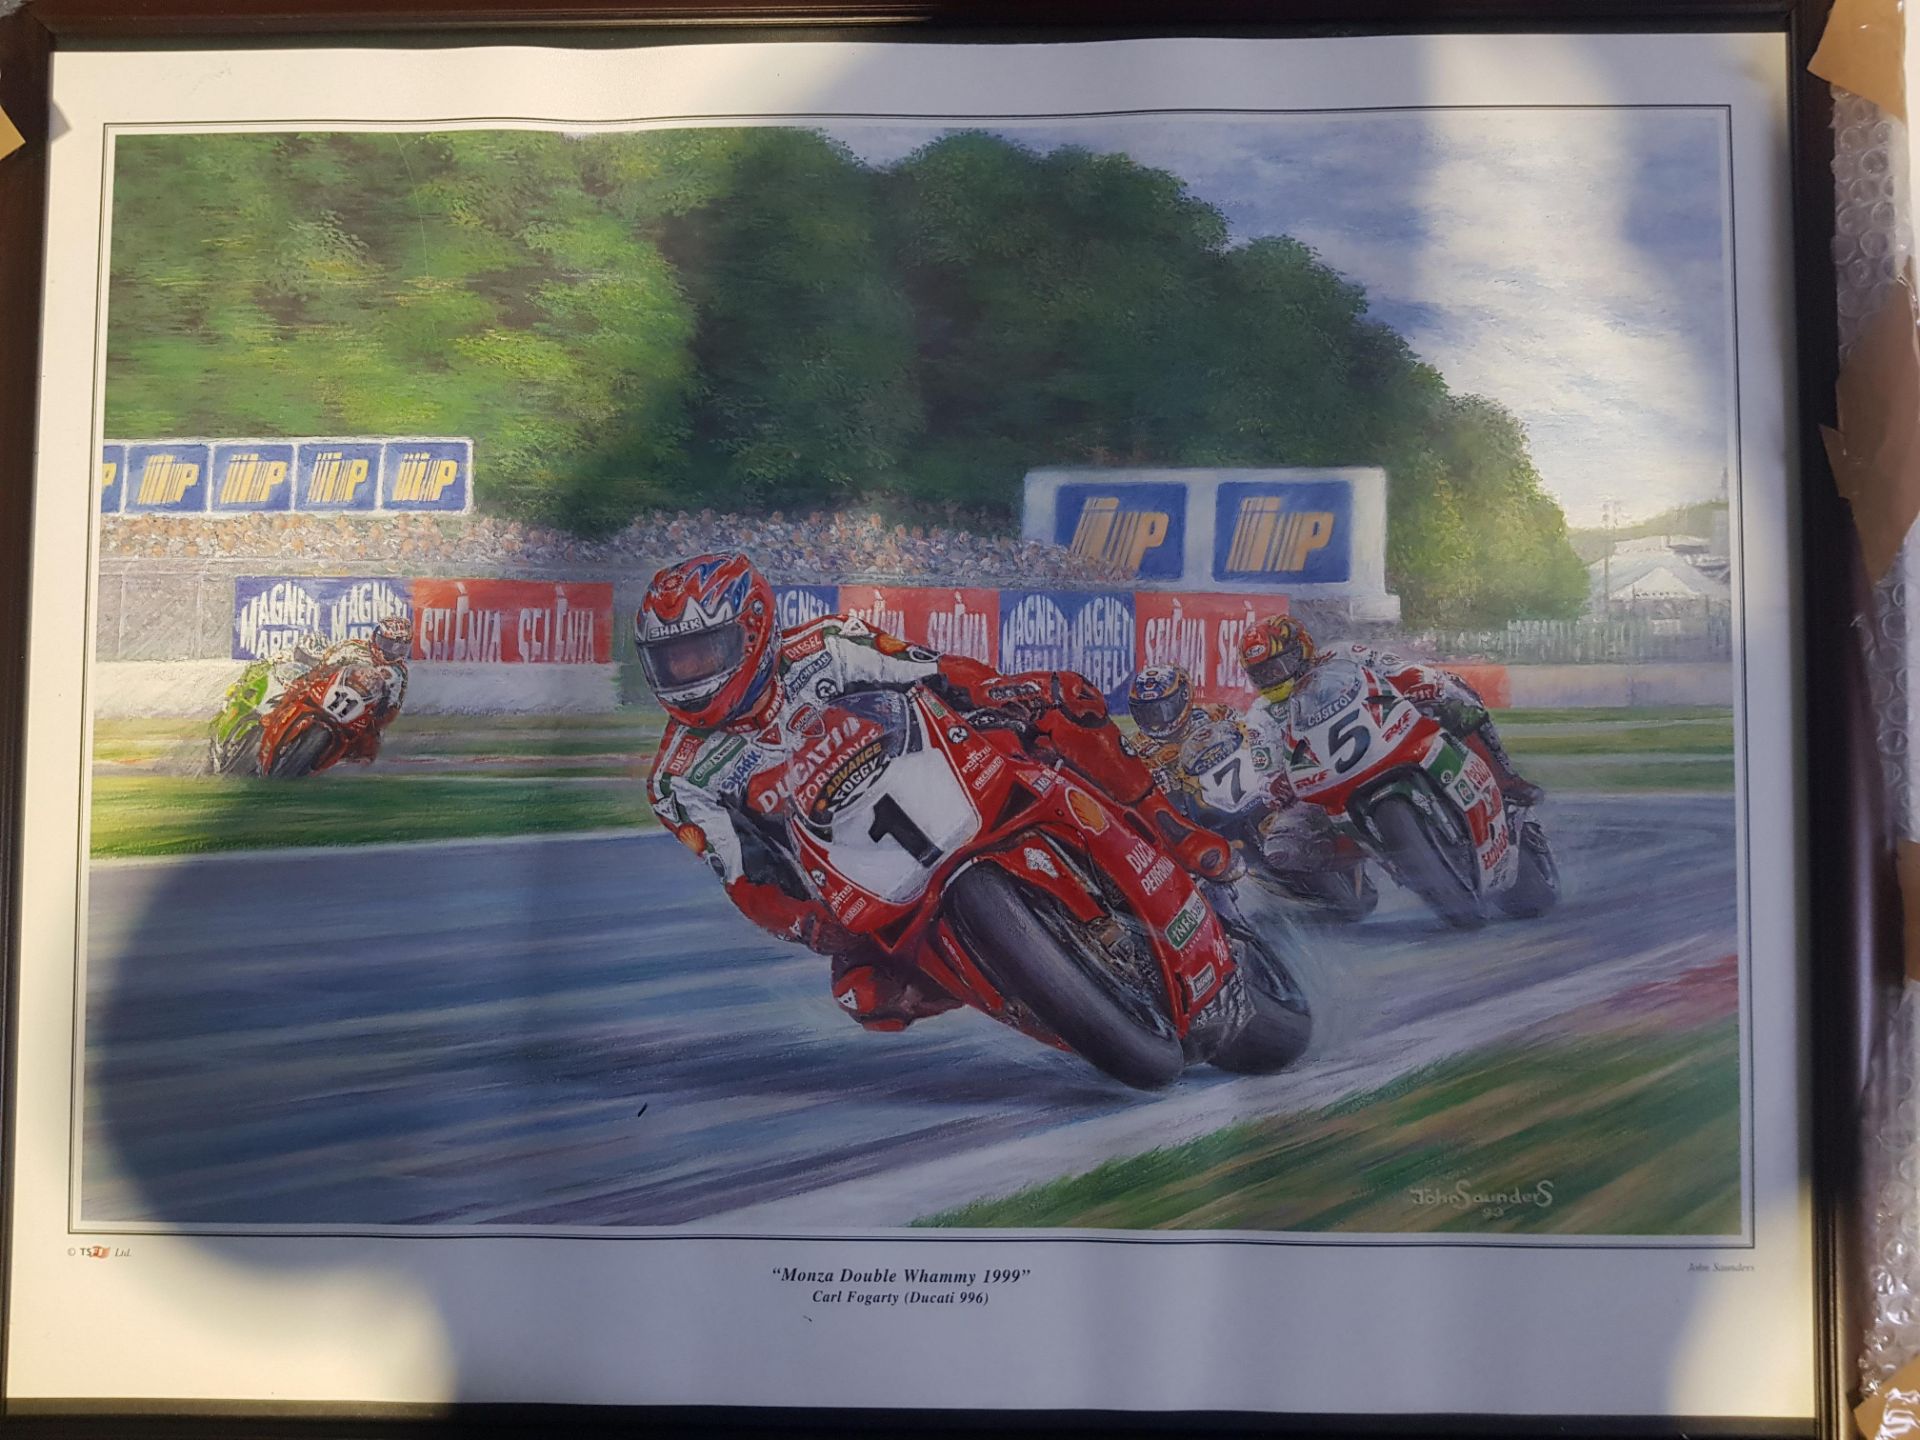 LARGE CARL FOGARTY PICTURE 1999 MONZA DOUBLE WAMMY WIN